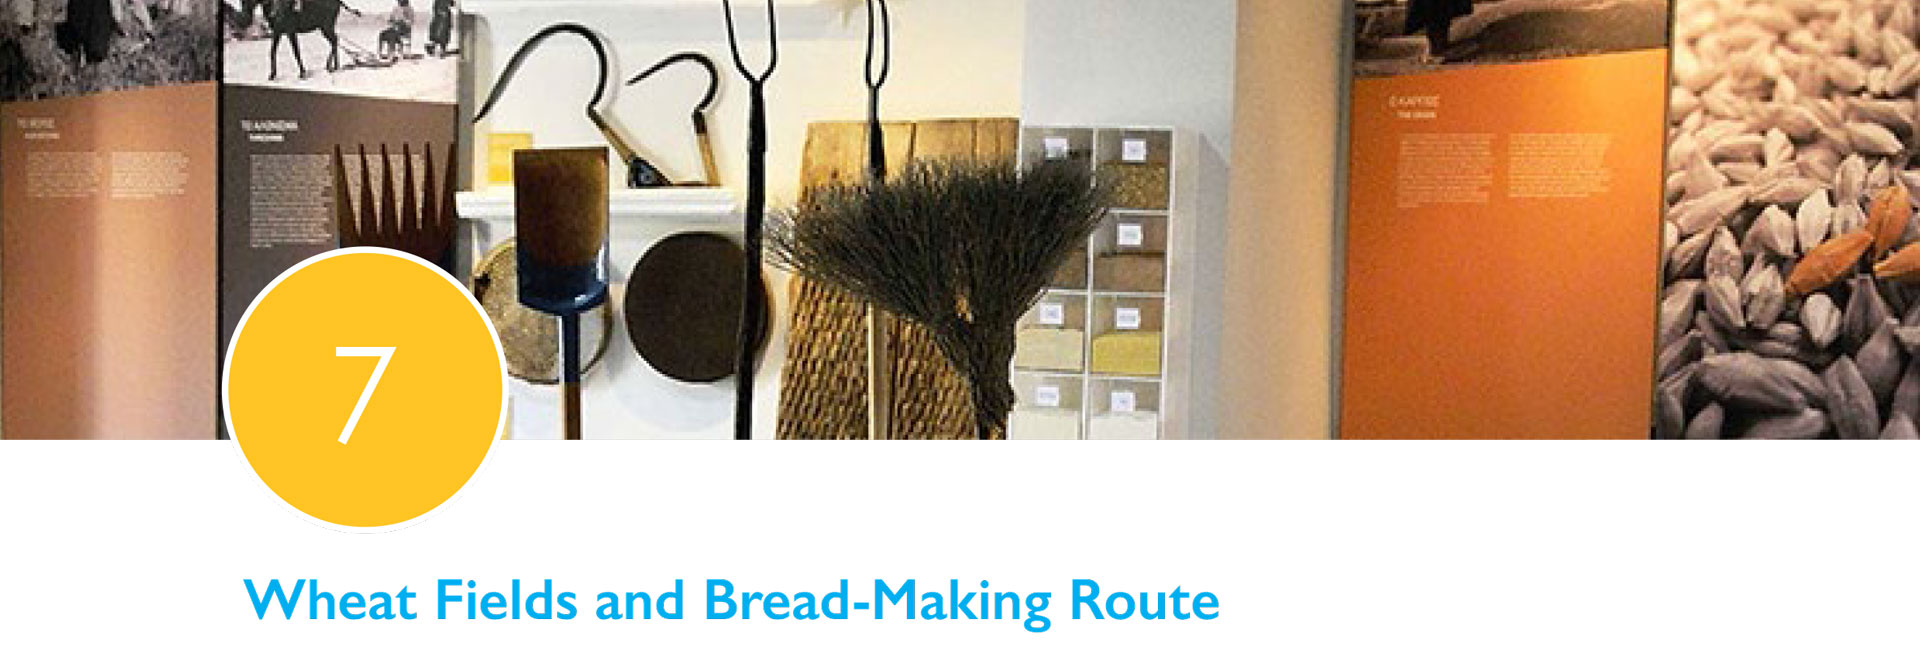 wheat-fileds-and-bread-making-route